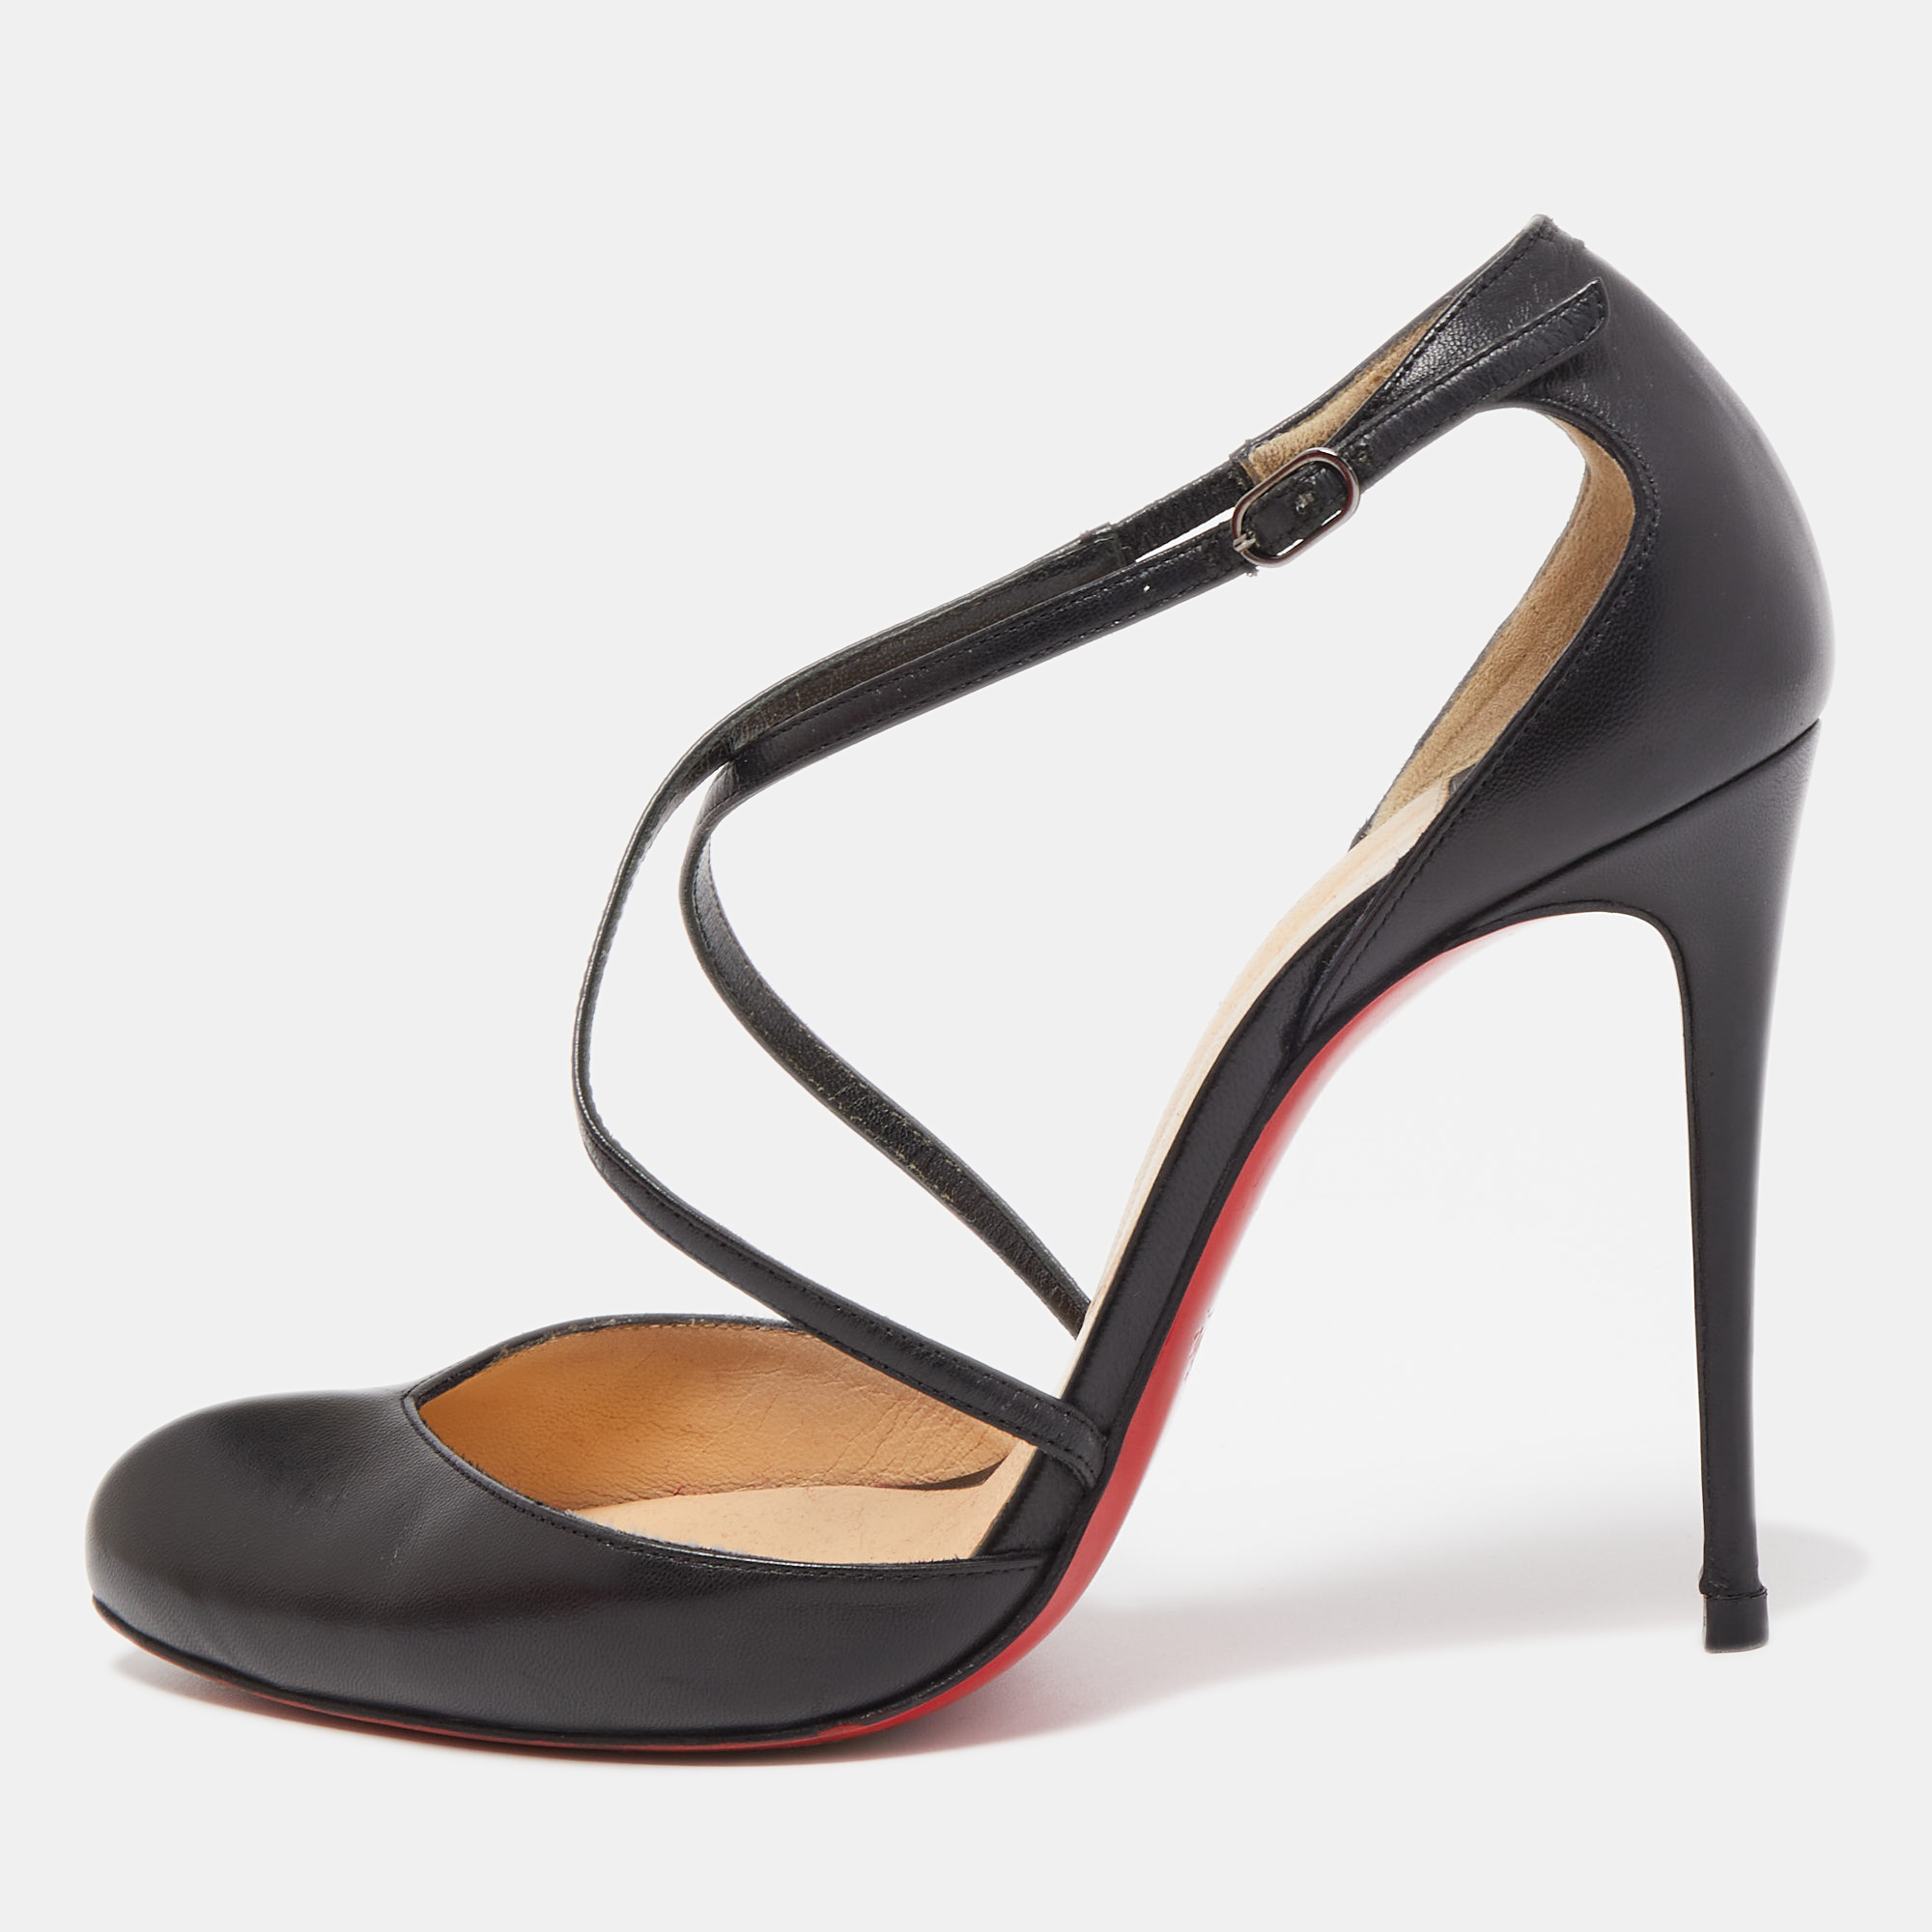 Pre-owned Christian Louboutin Black Leather Cross Ankle Strap Pumps Size 37